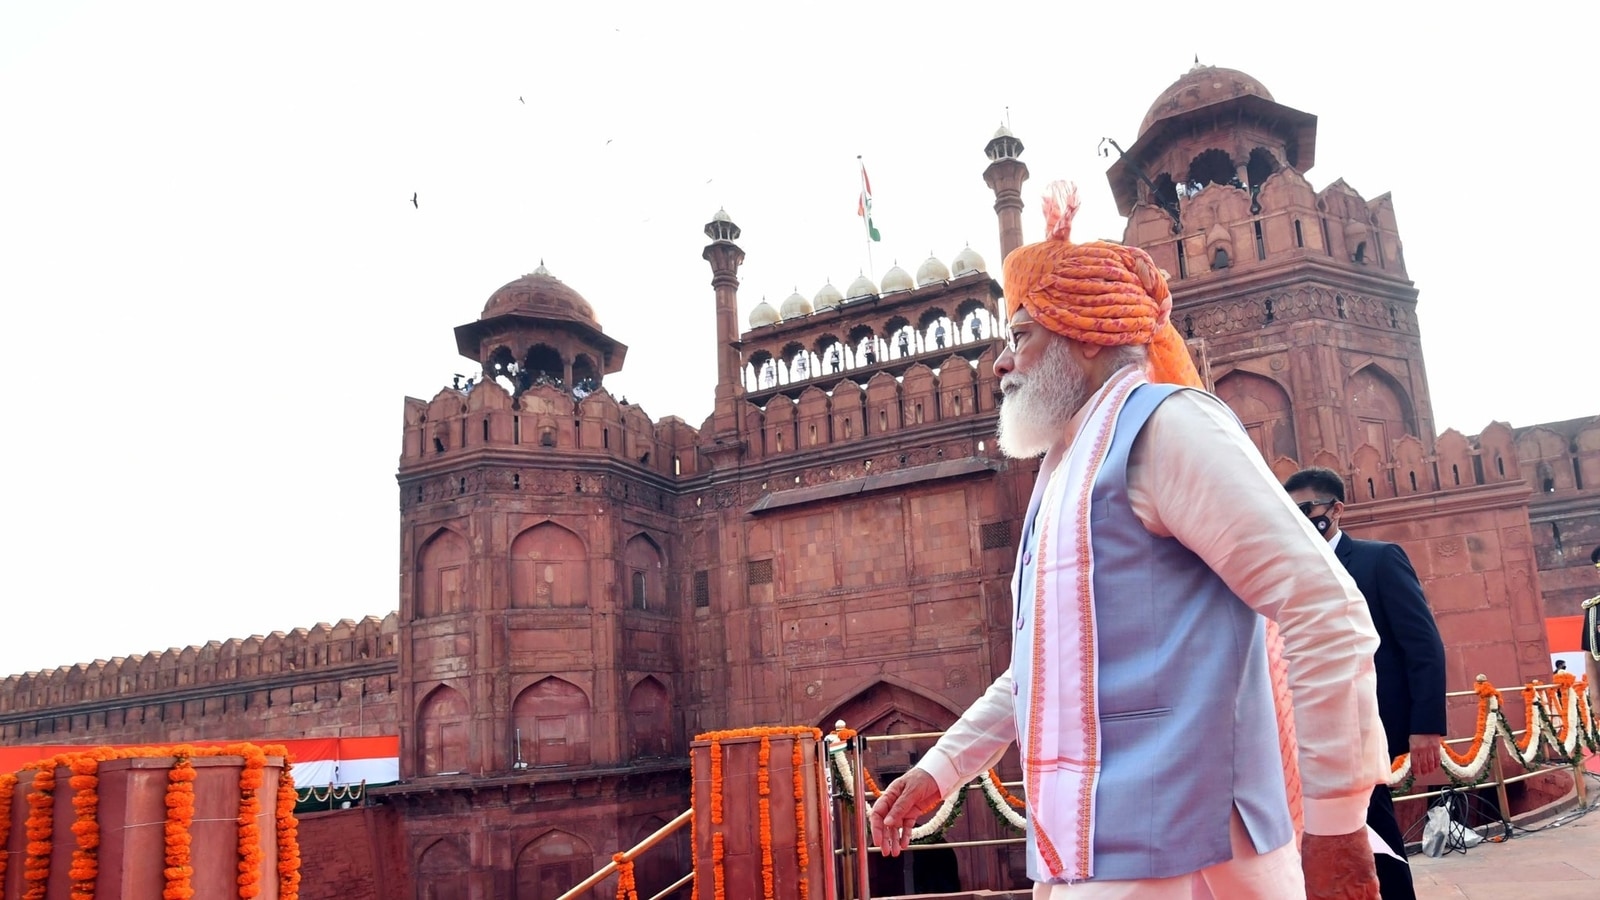 short note on red fort in hindi